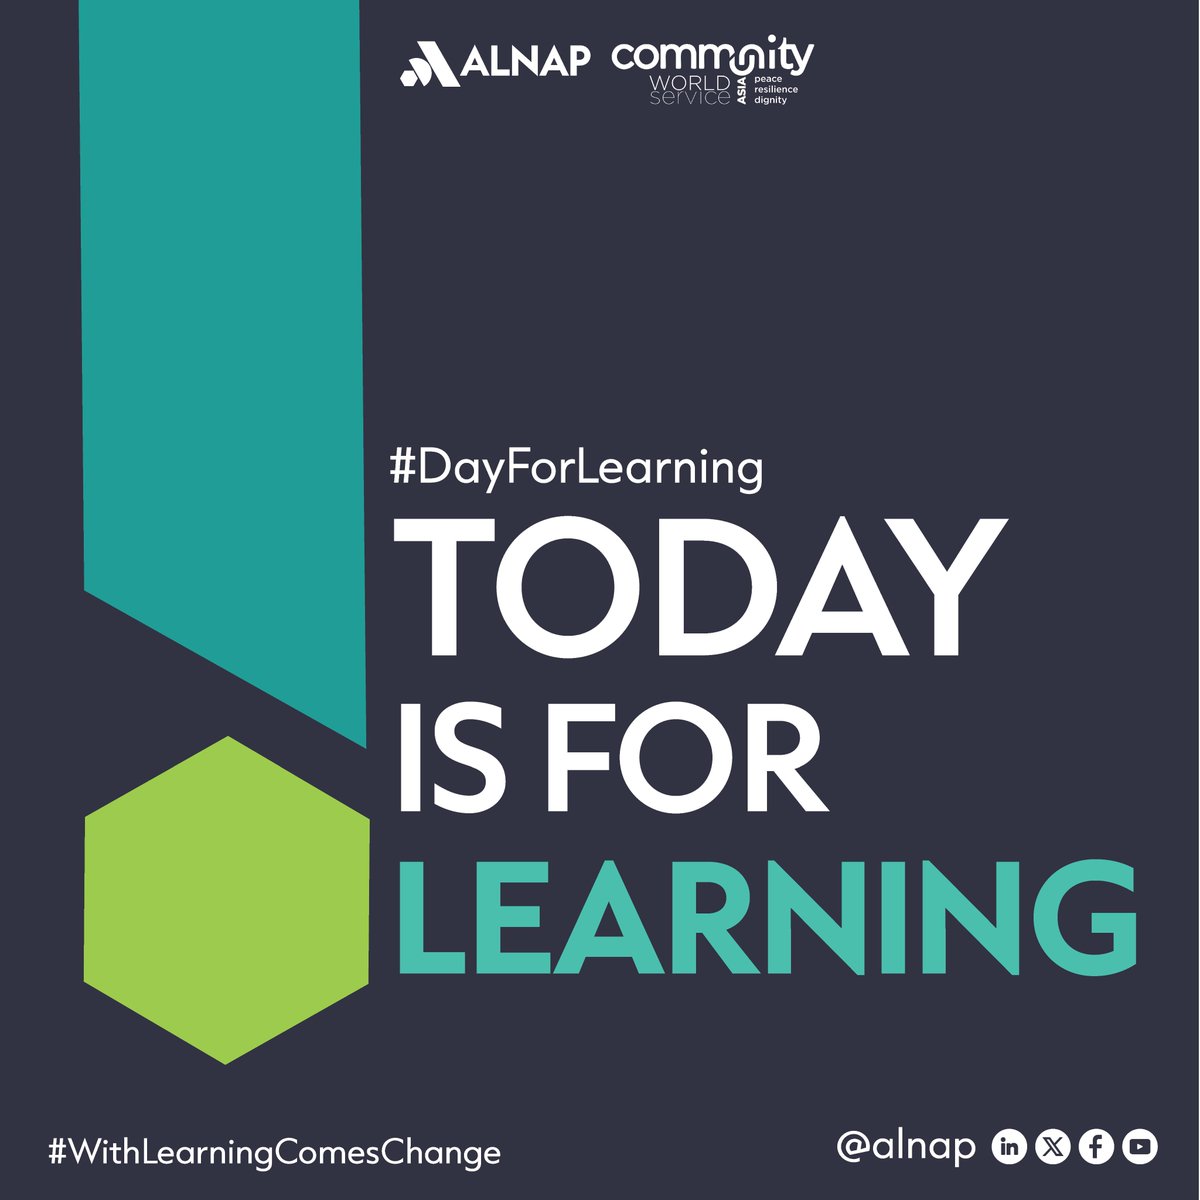 Do you ♥️ learning?
@ALNAP knows there's a greater need than ever to unlock rich learning already within our sector to tackle humanitarian challenges head on.
Join us on a new journey to transform humanitarian learning
#WithLearningComesChange #DayForLearning #UnlockLearning